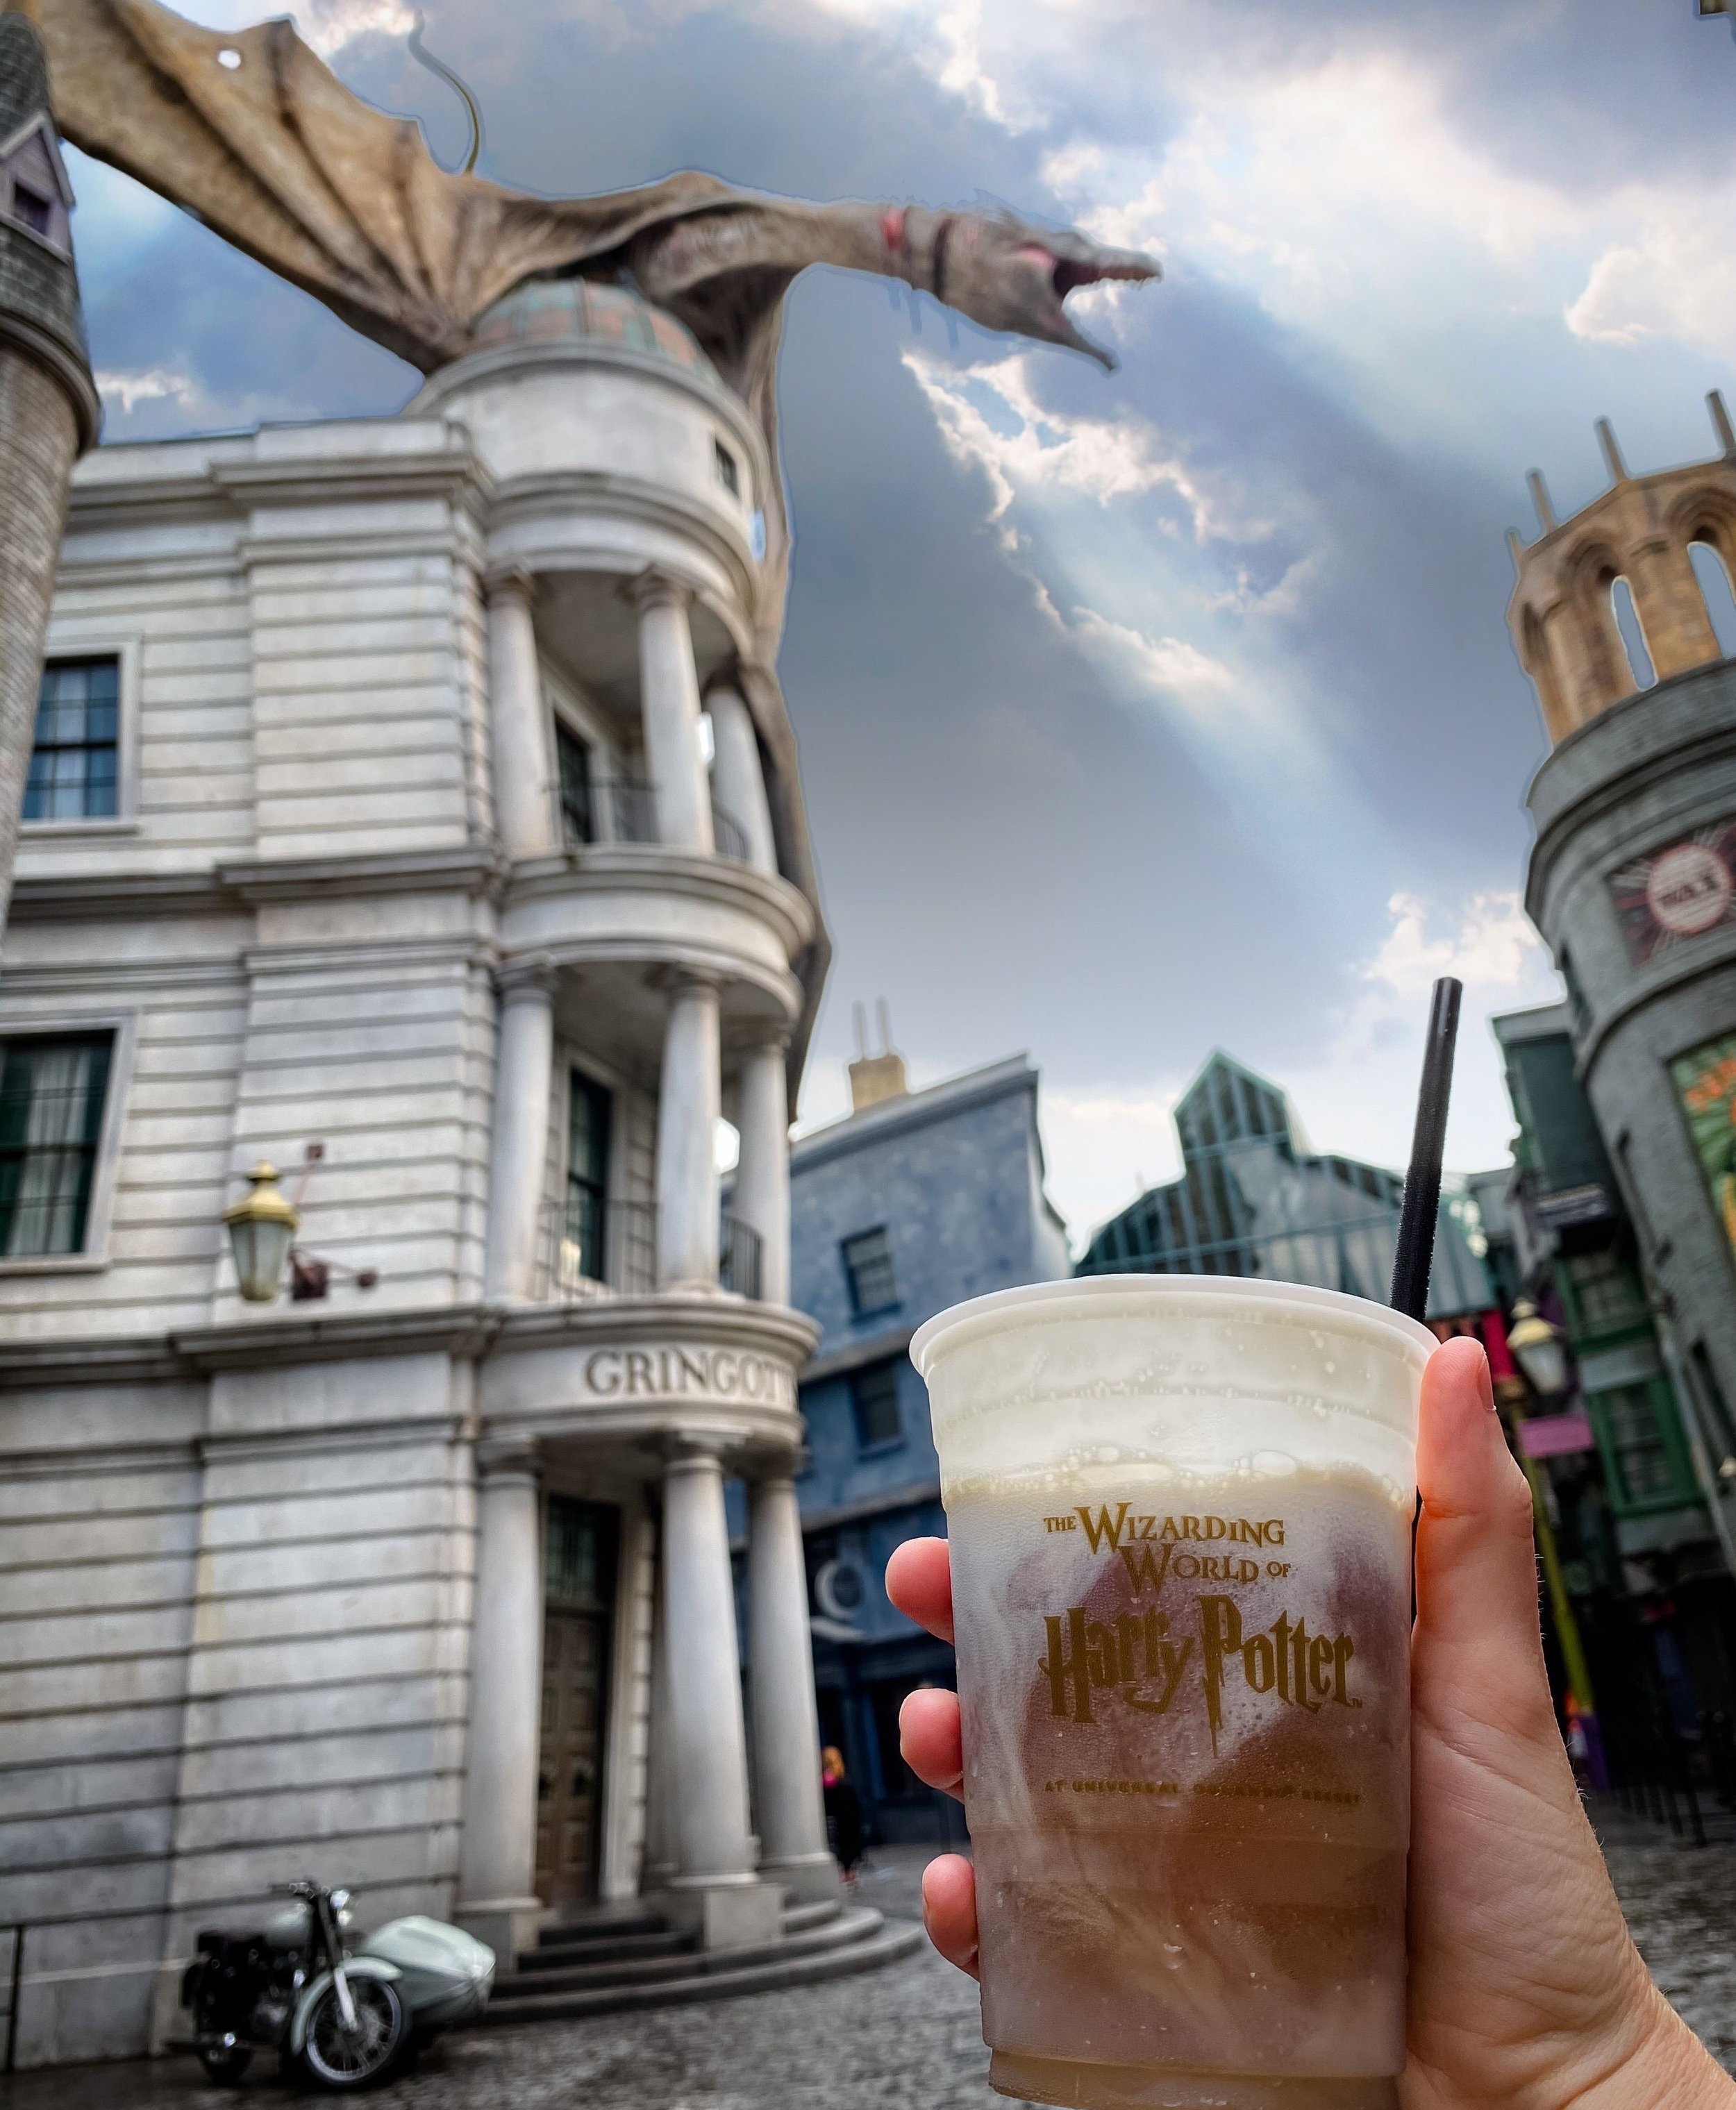 Tips for Visiting Universal Orlando: The Best Park-to-Park Guide